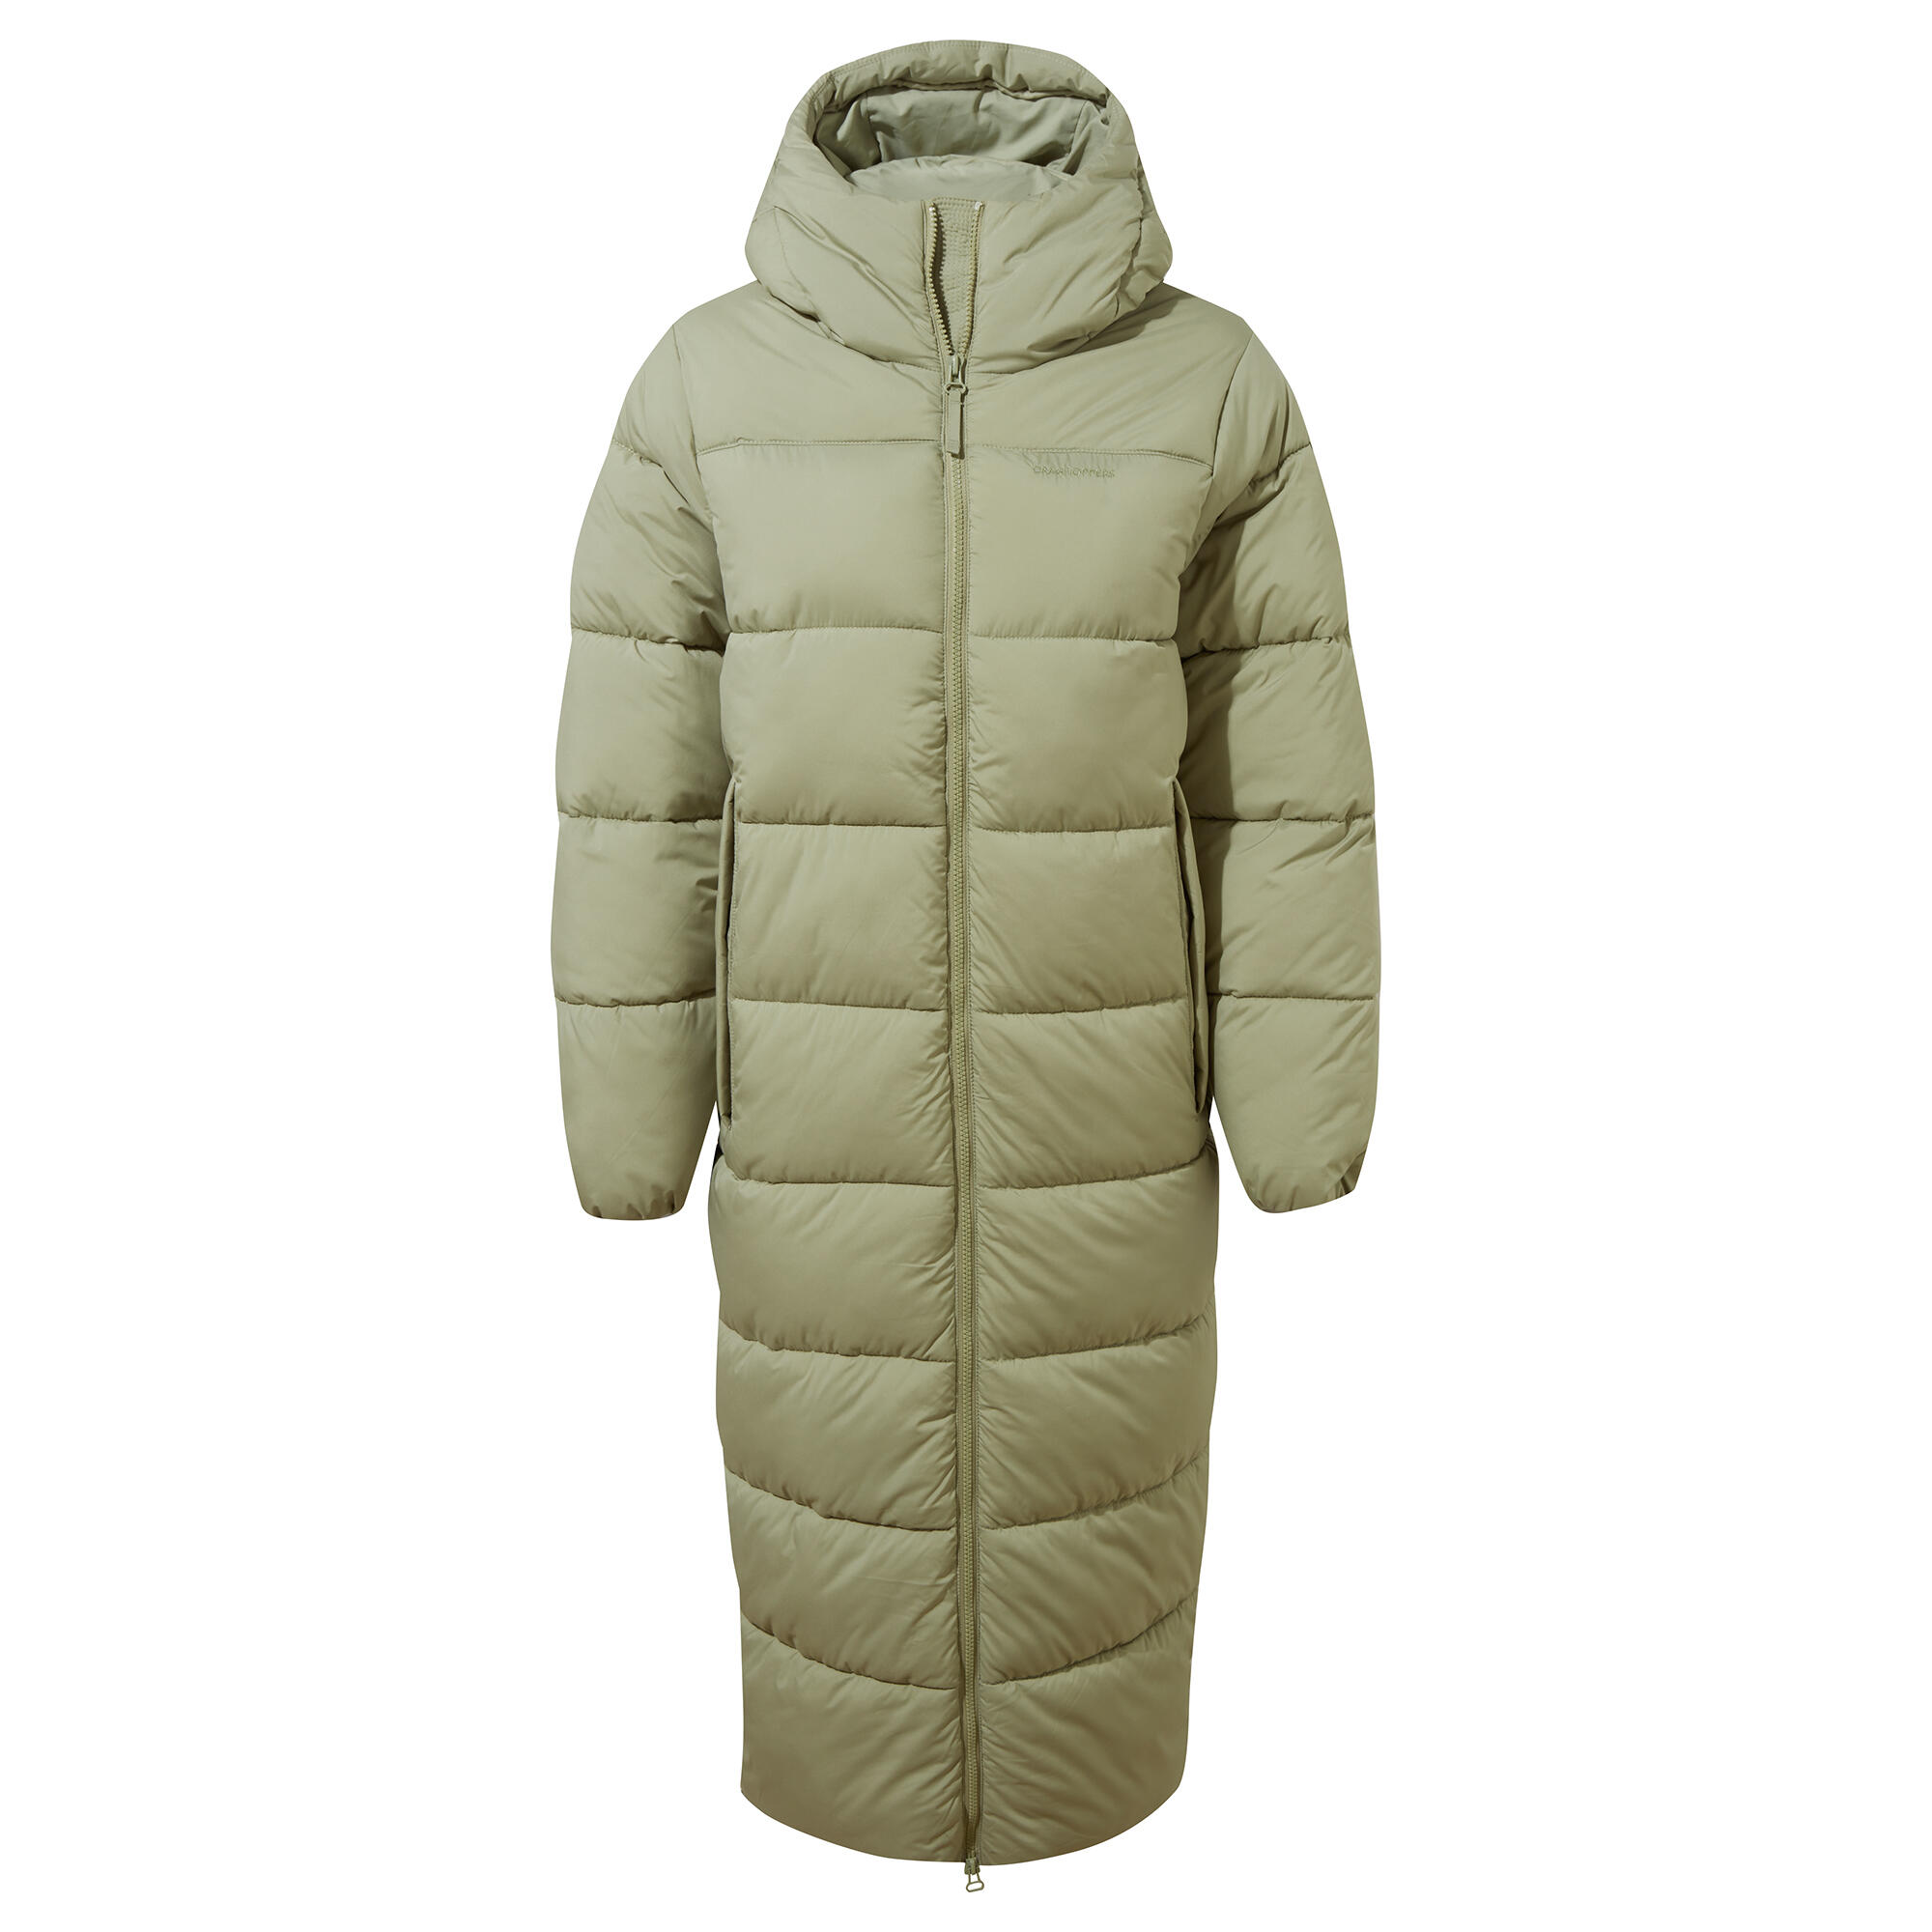 CRAGHOPPERS Women's Narlia Insulated Hooded Jacket